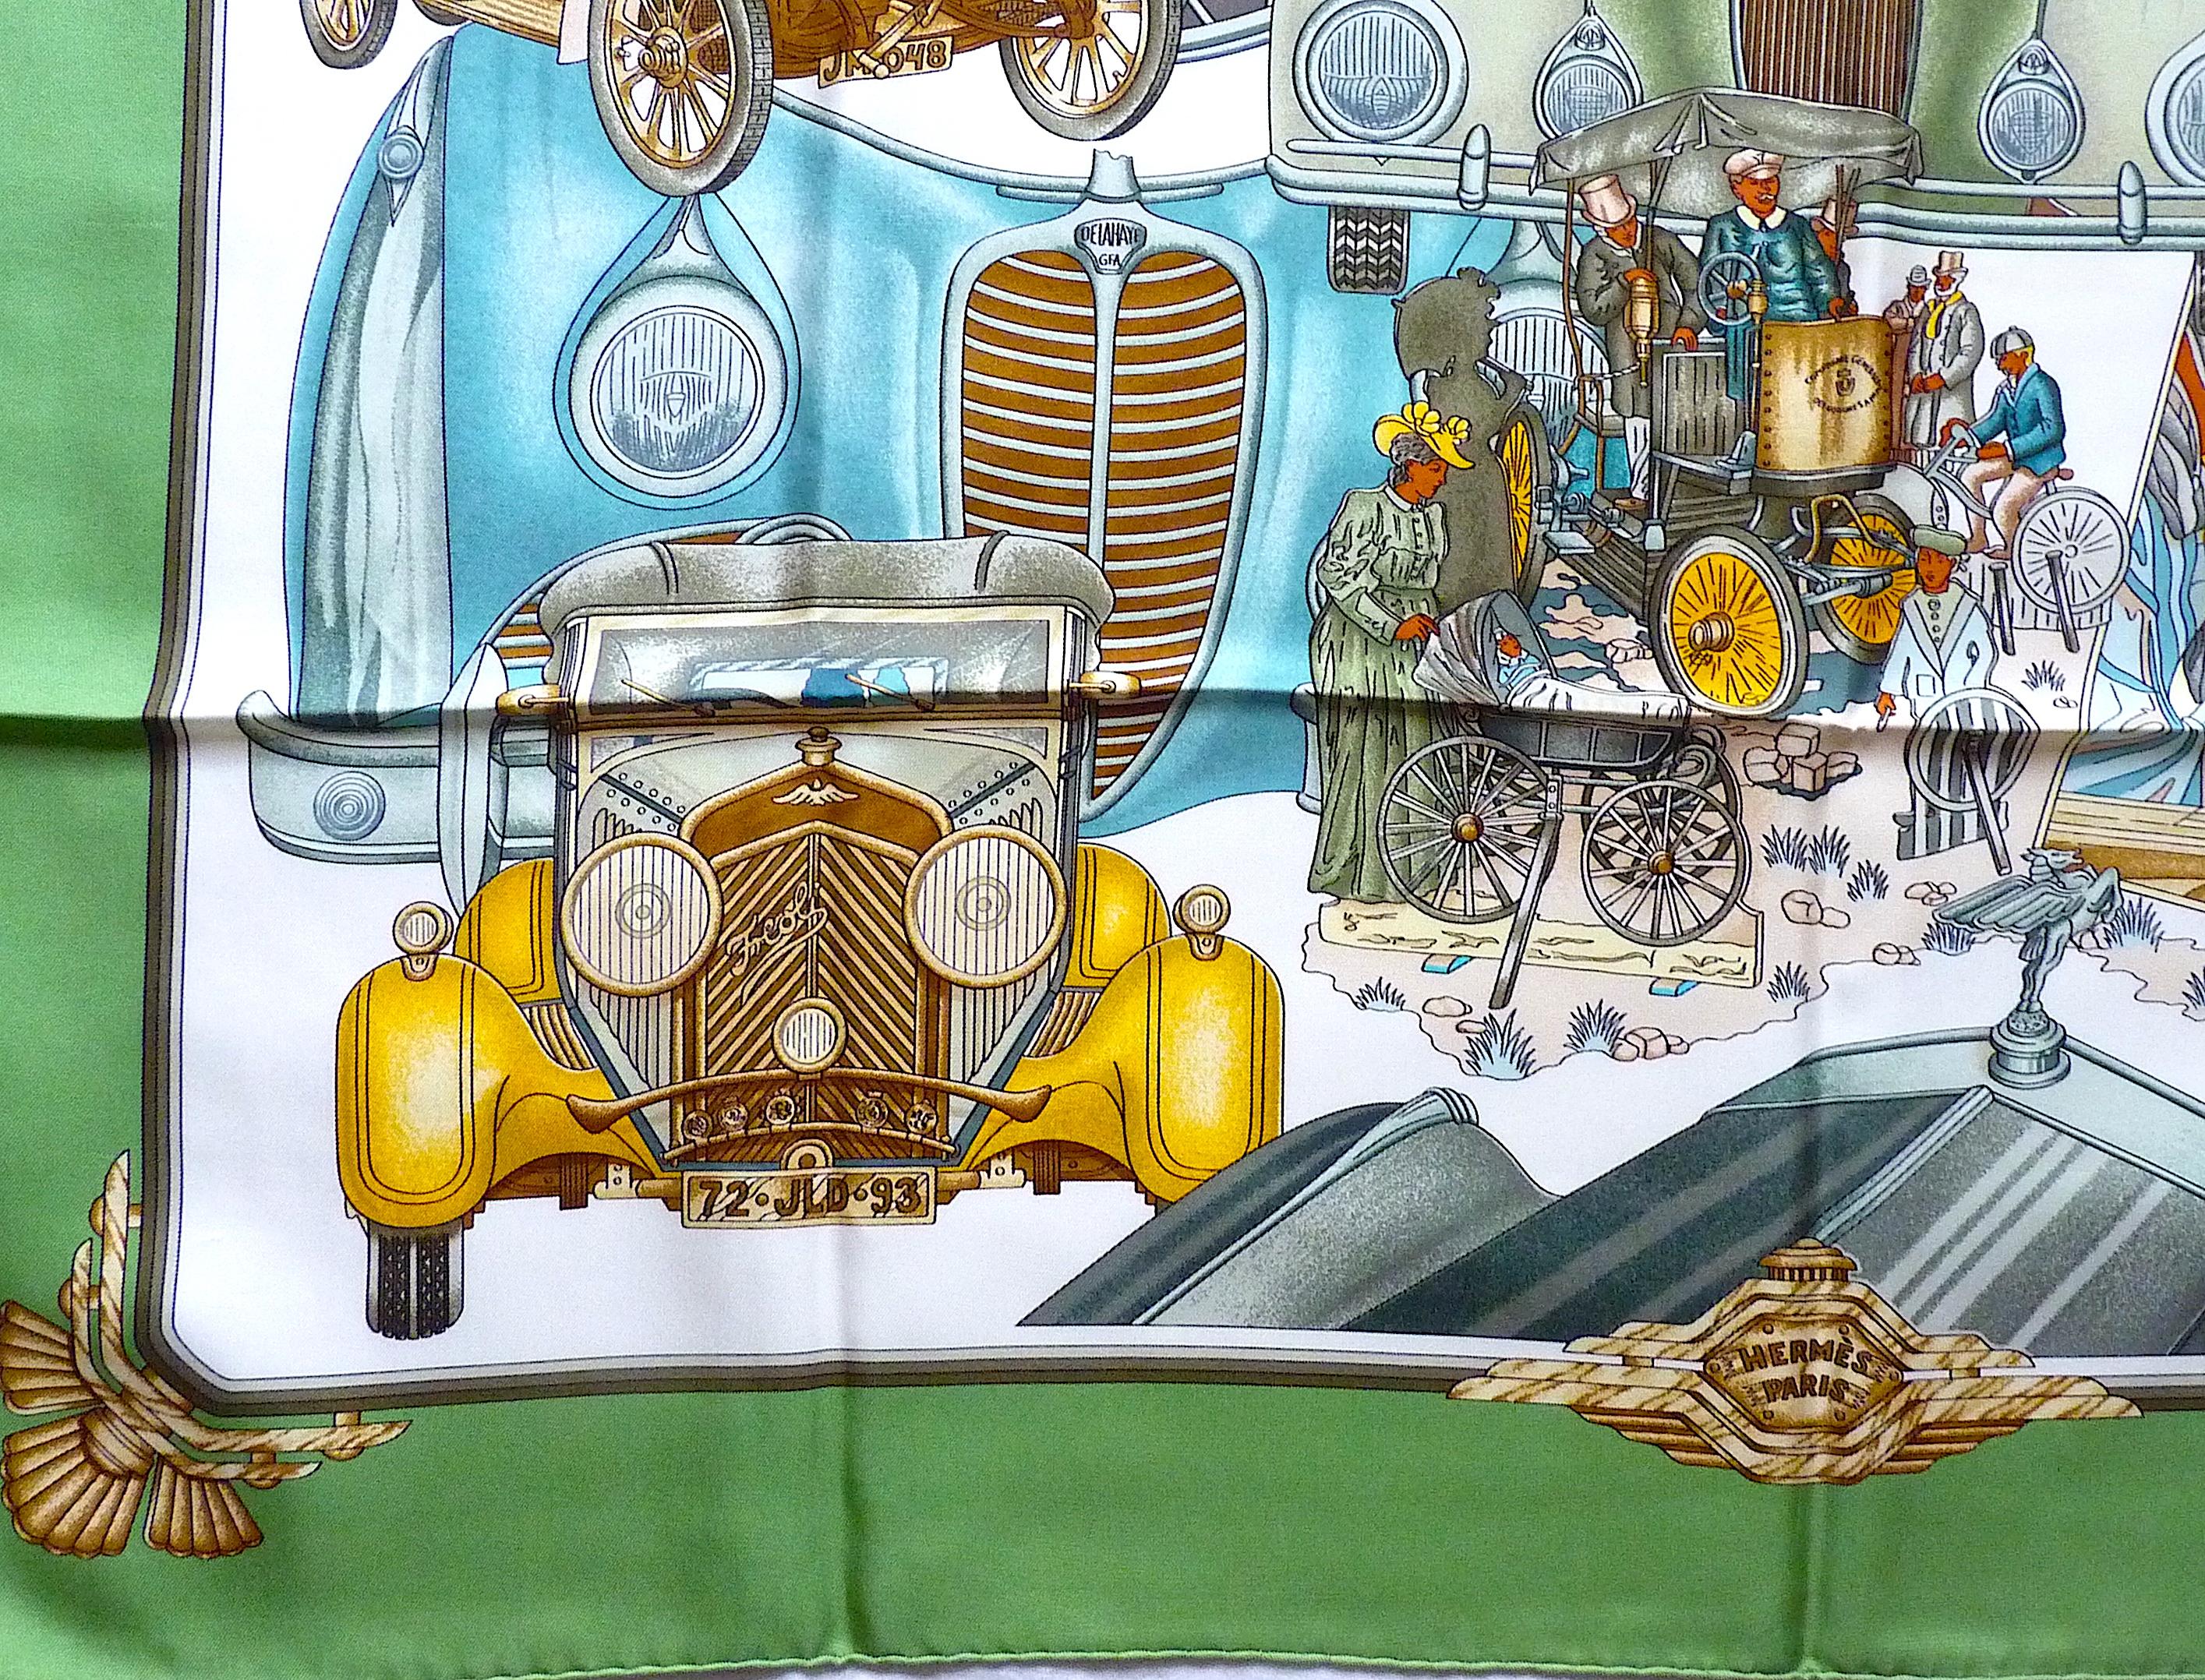 HERMES Scarf Automobile By Joachim Metz in Original Box, Issued in 1995 4